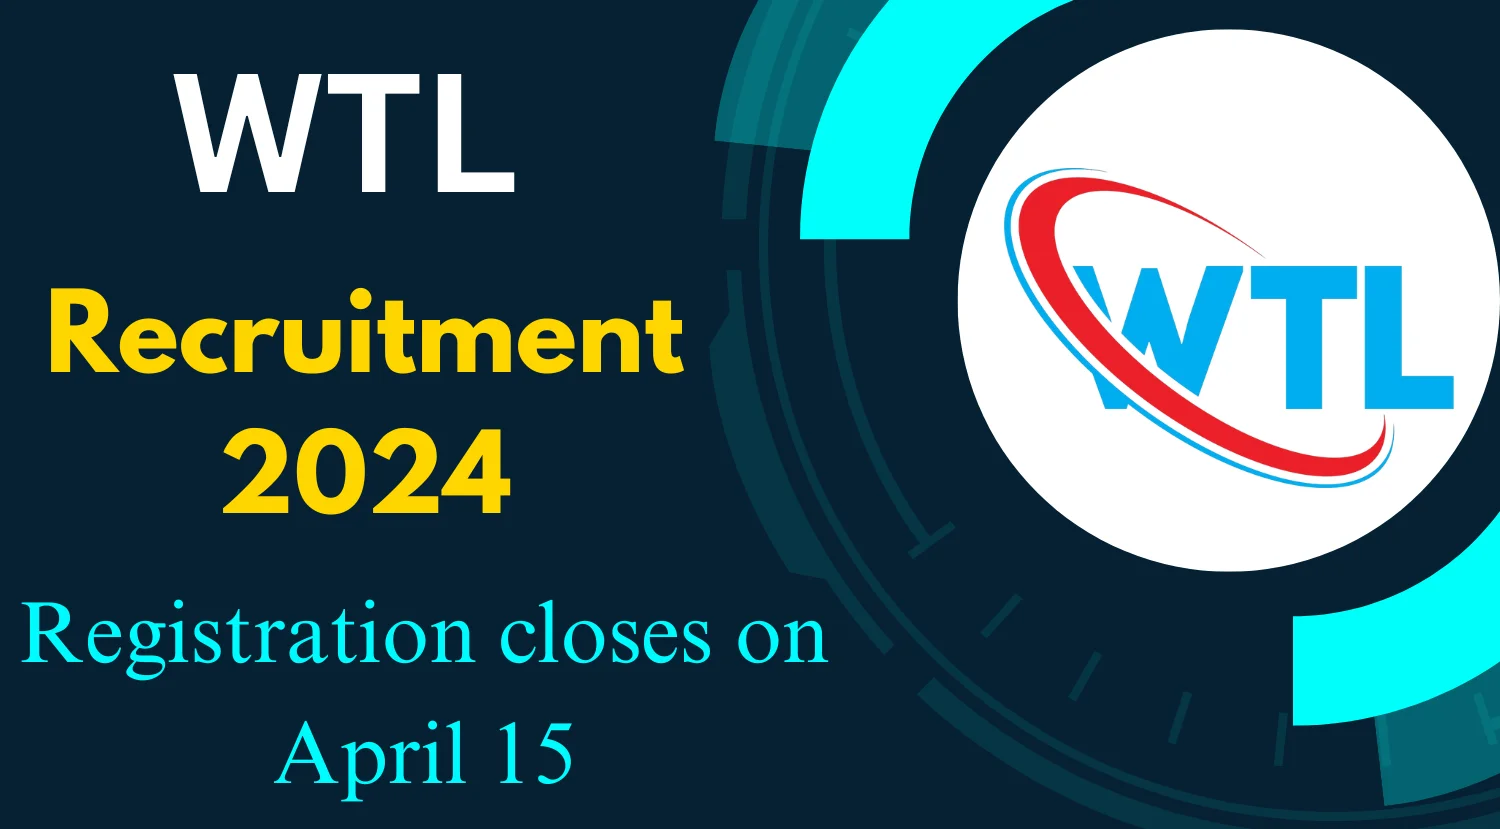 WTL Executive and Manager Recruitment 2024